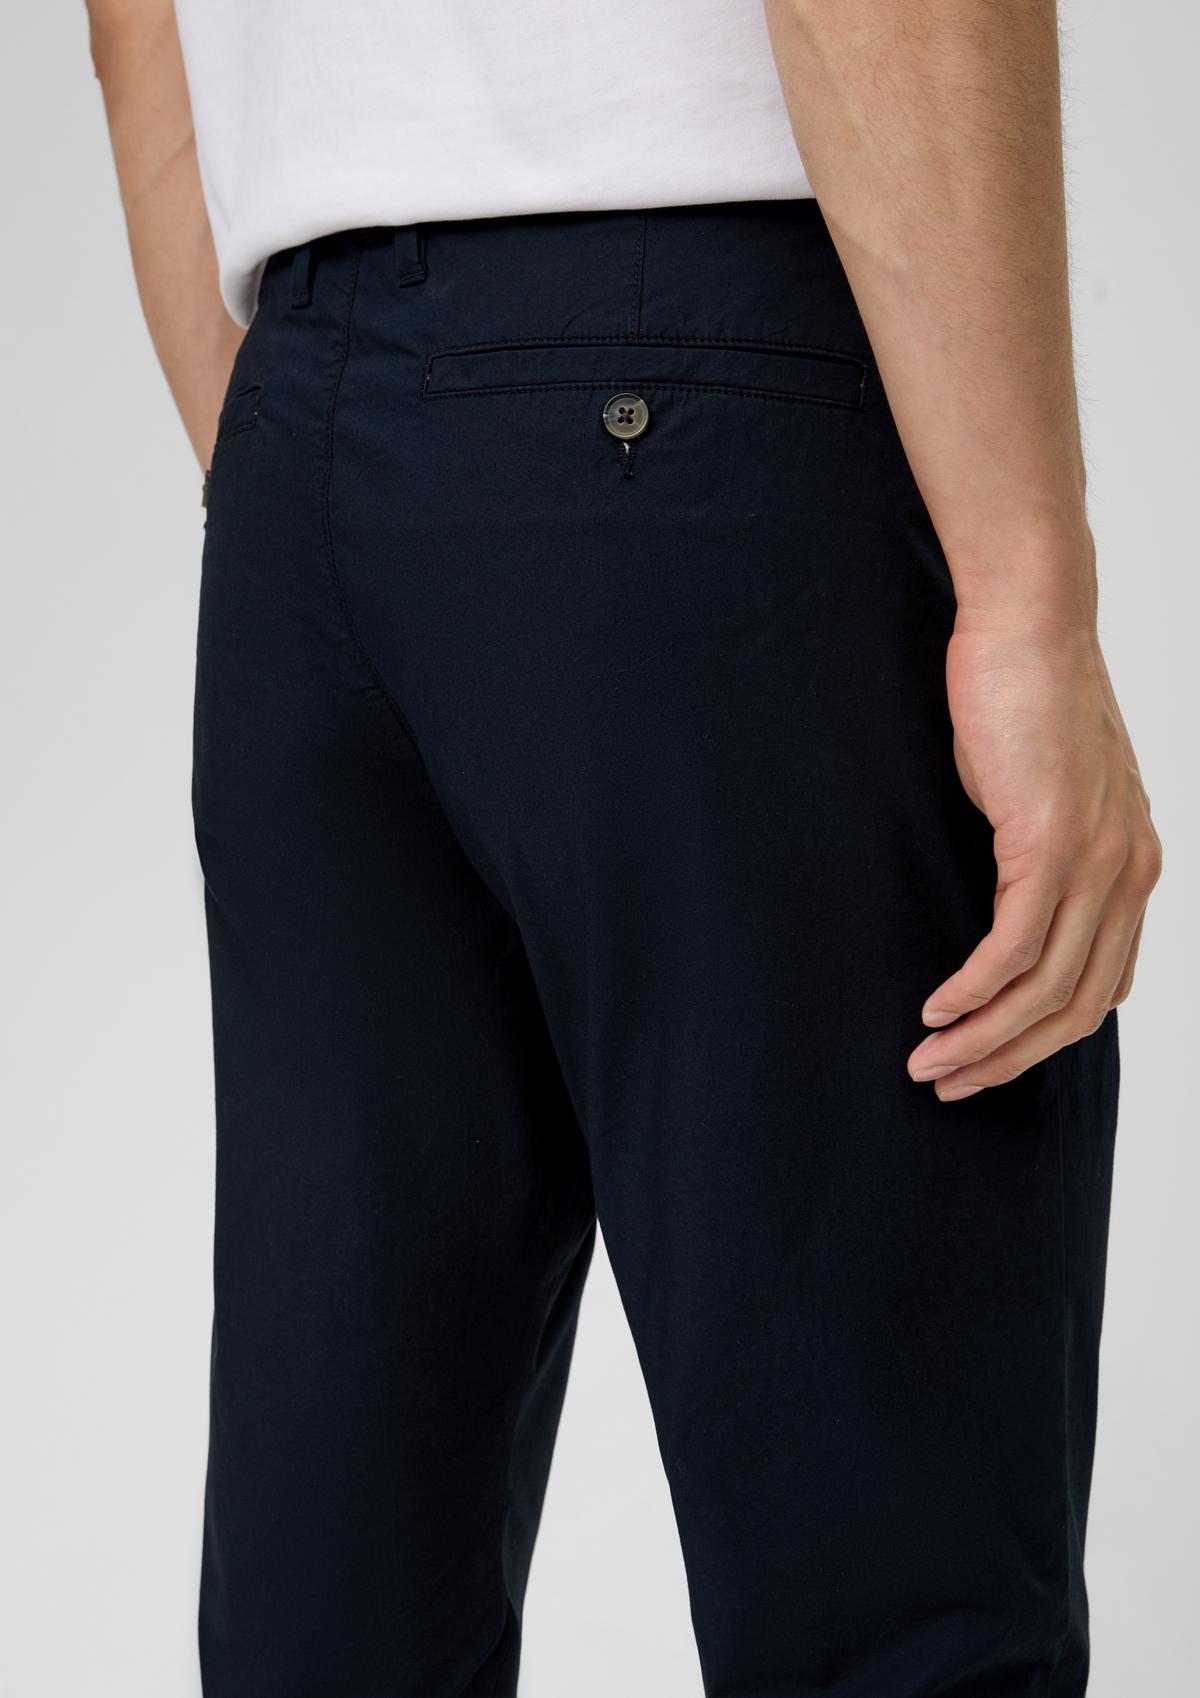 s.Oliver trousers made of stretch cotton